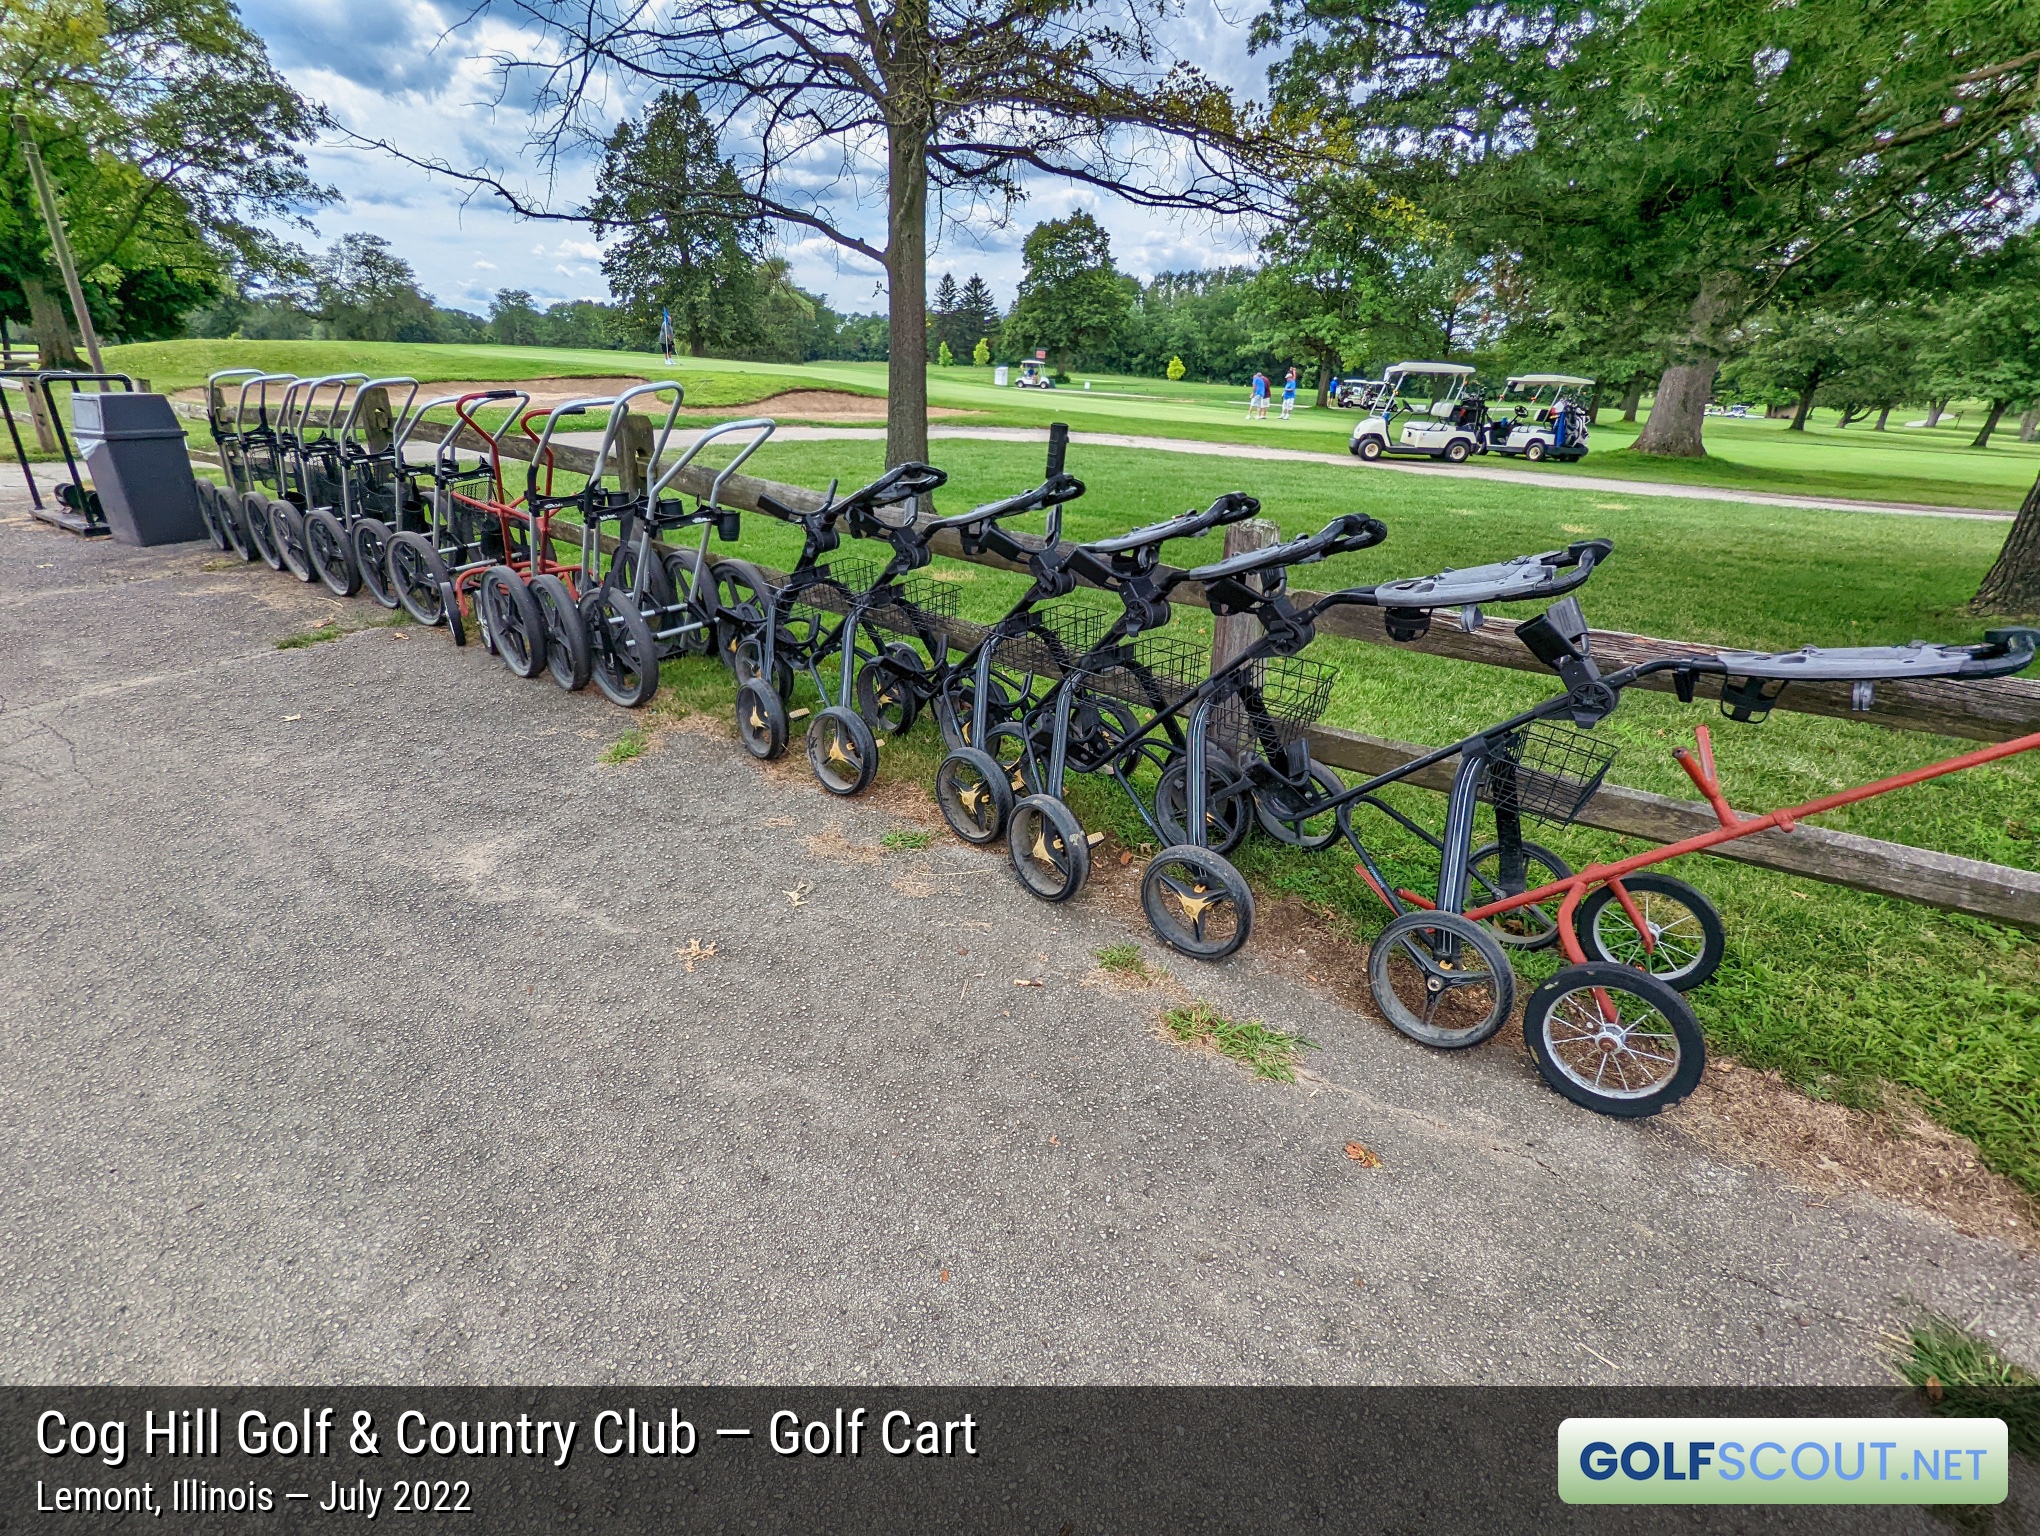 Photo of the golf carts at Cog Hill Course #2 - Ravines in Lemont, Illinois. Lots of different varieties.